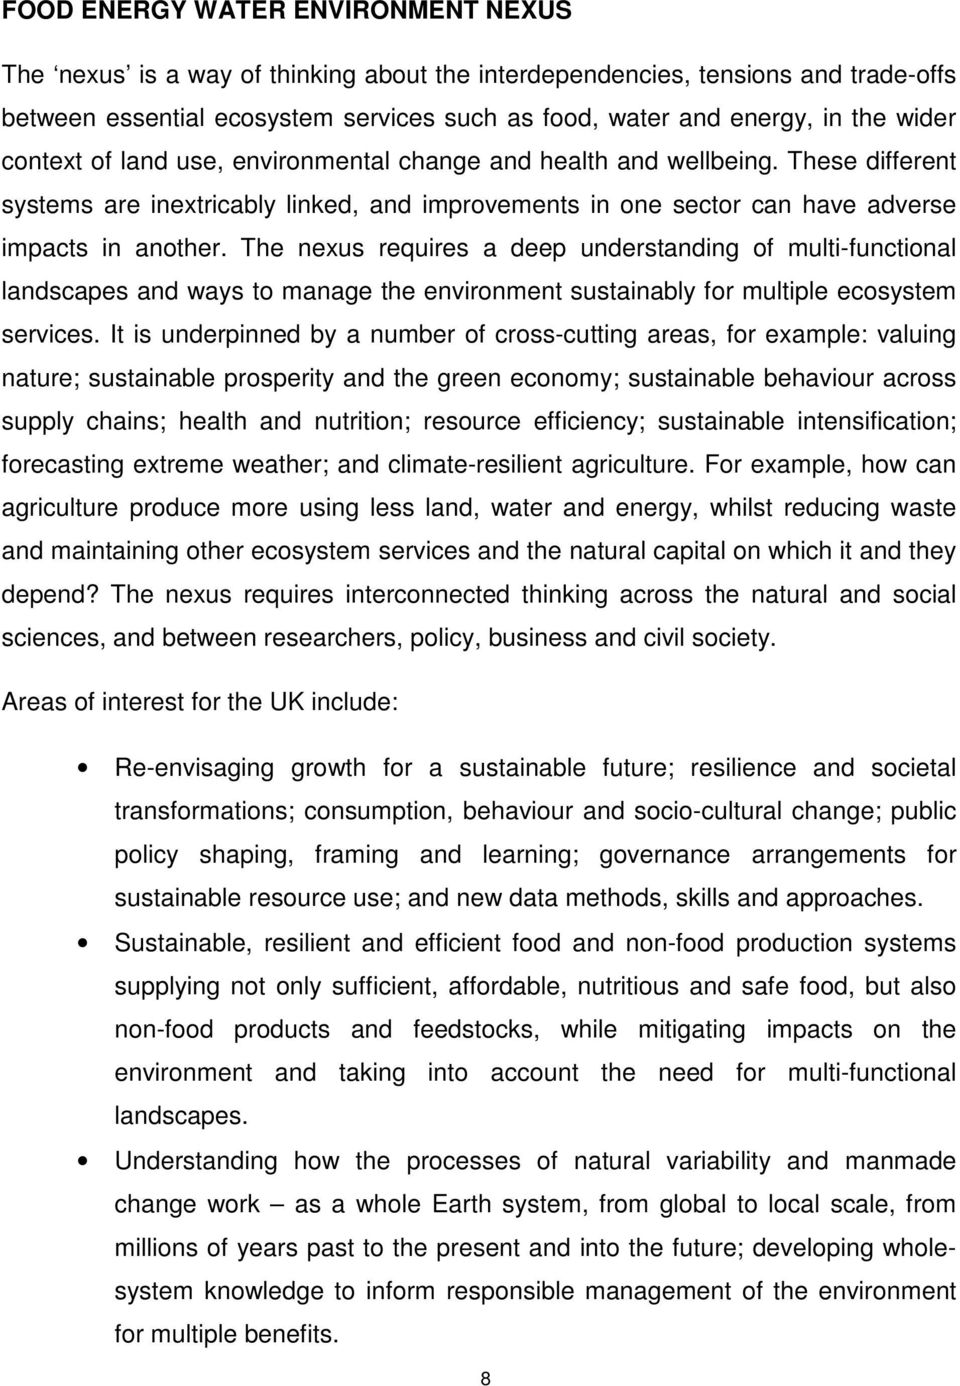 The nexus requires a deep understanding of multi-functional landscapes and ways to manage the environment sustainably for multiple ecosystem services.